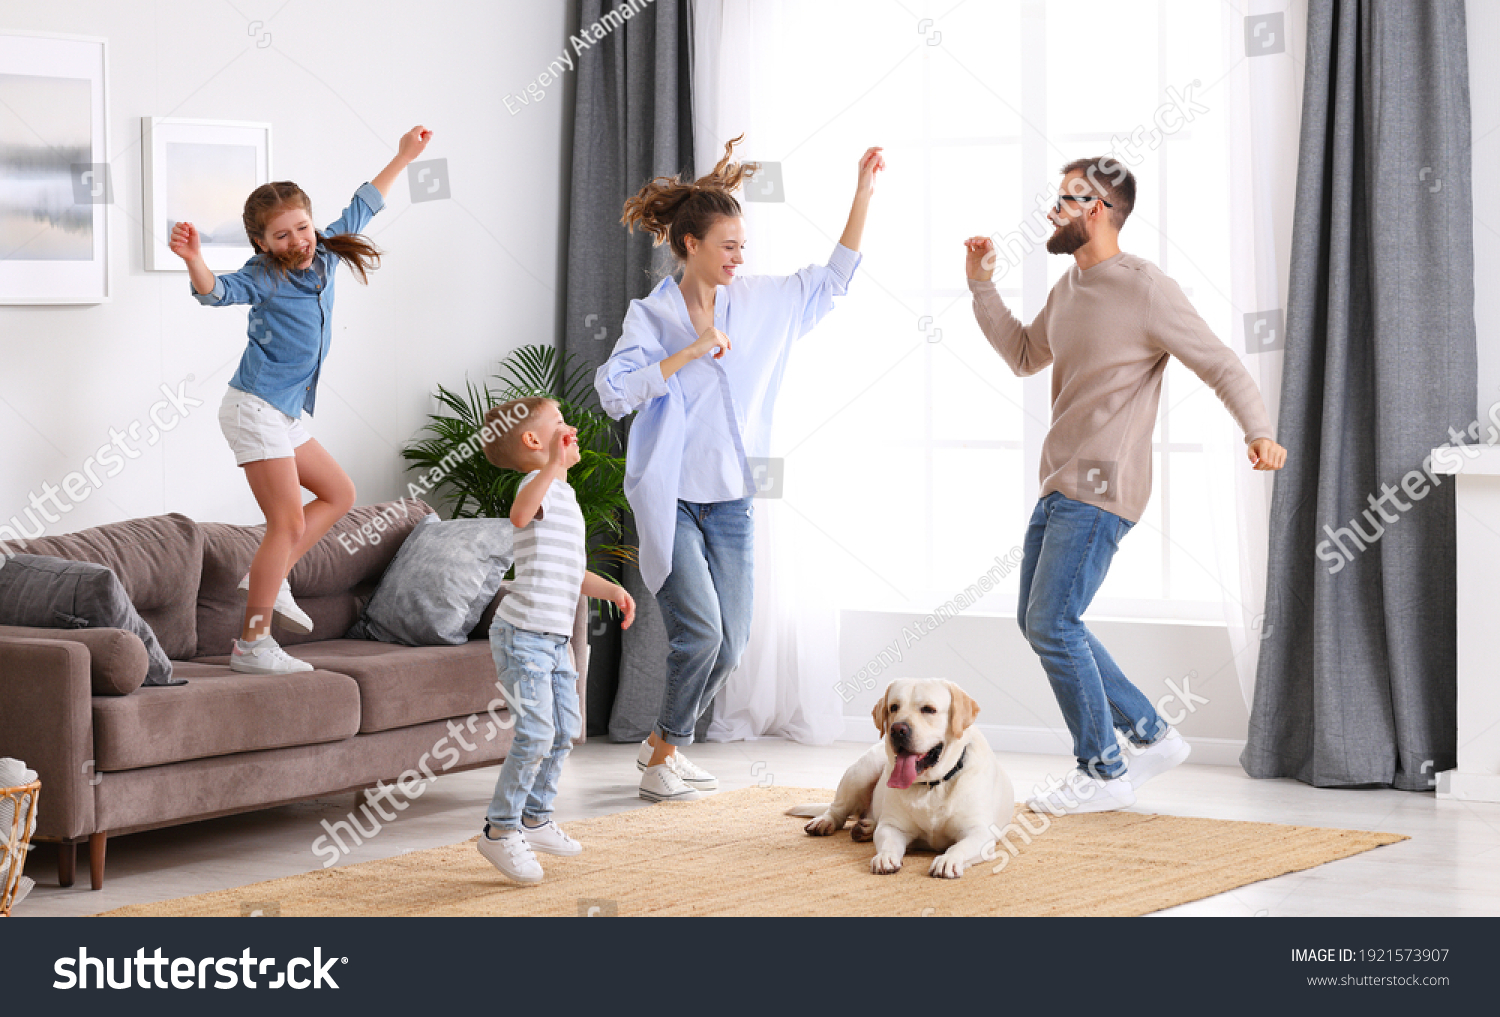 Full body of happy energetic family: parents and kids having fun and dancing while cute tired dog resting on carpet during weekend at home #1921573907